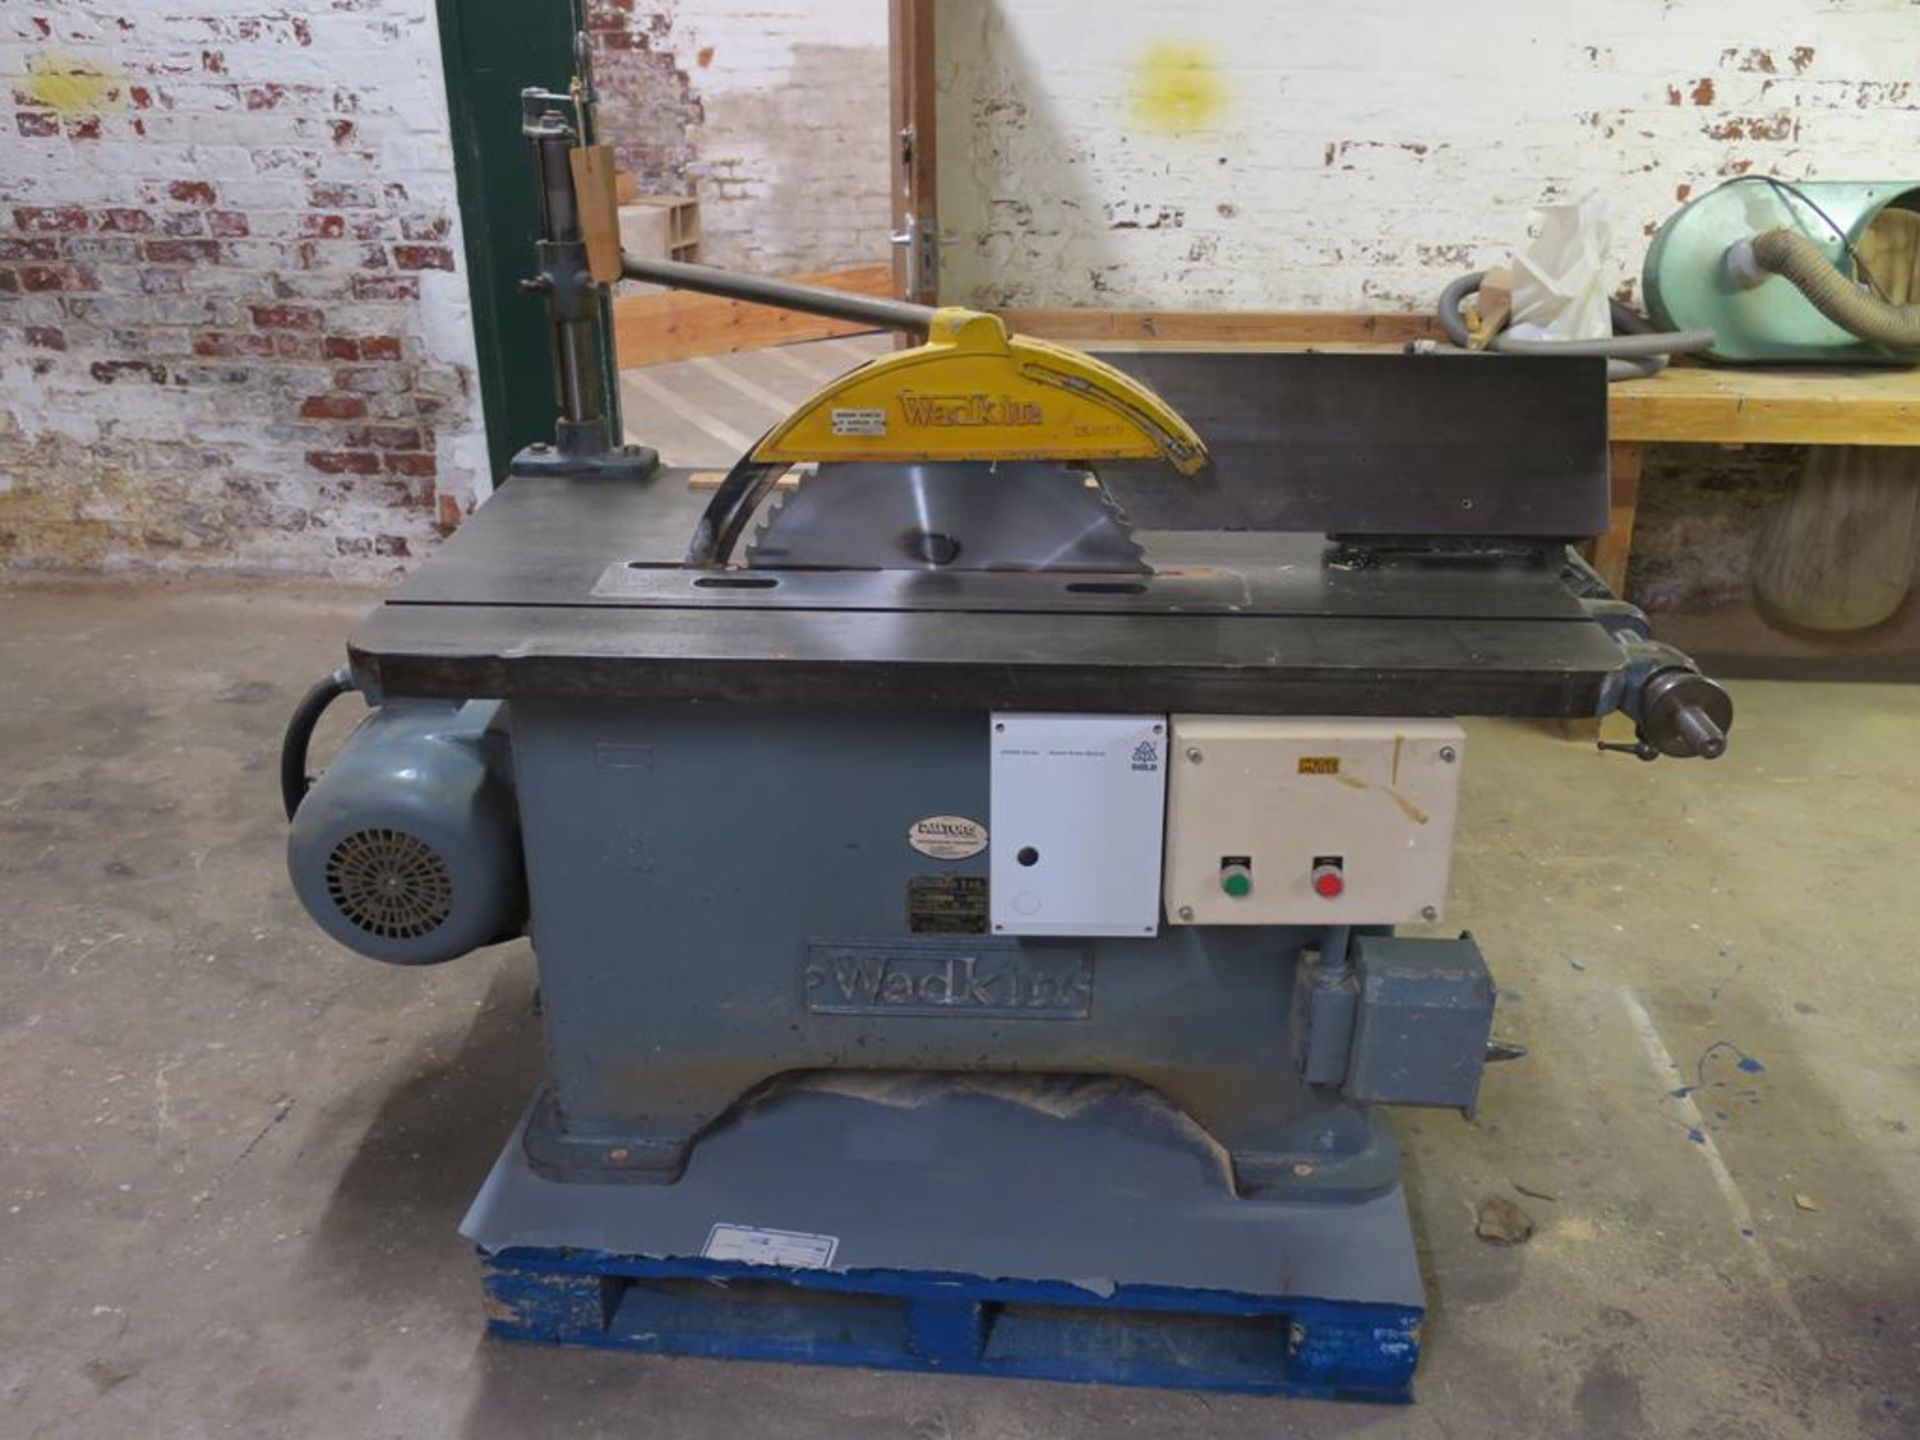 * Wadkin SP Table Saw, 3PH, 415V with Spare Blade. Model No: SP463, table size 1410mm x 760mm.